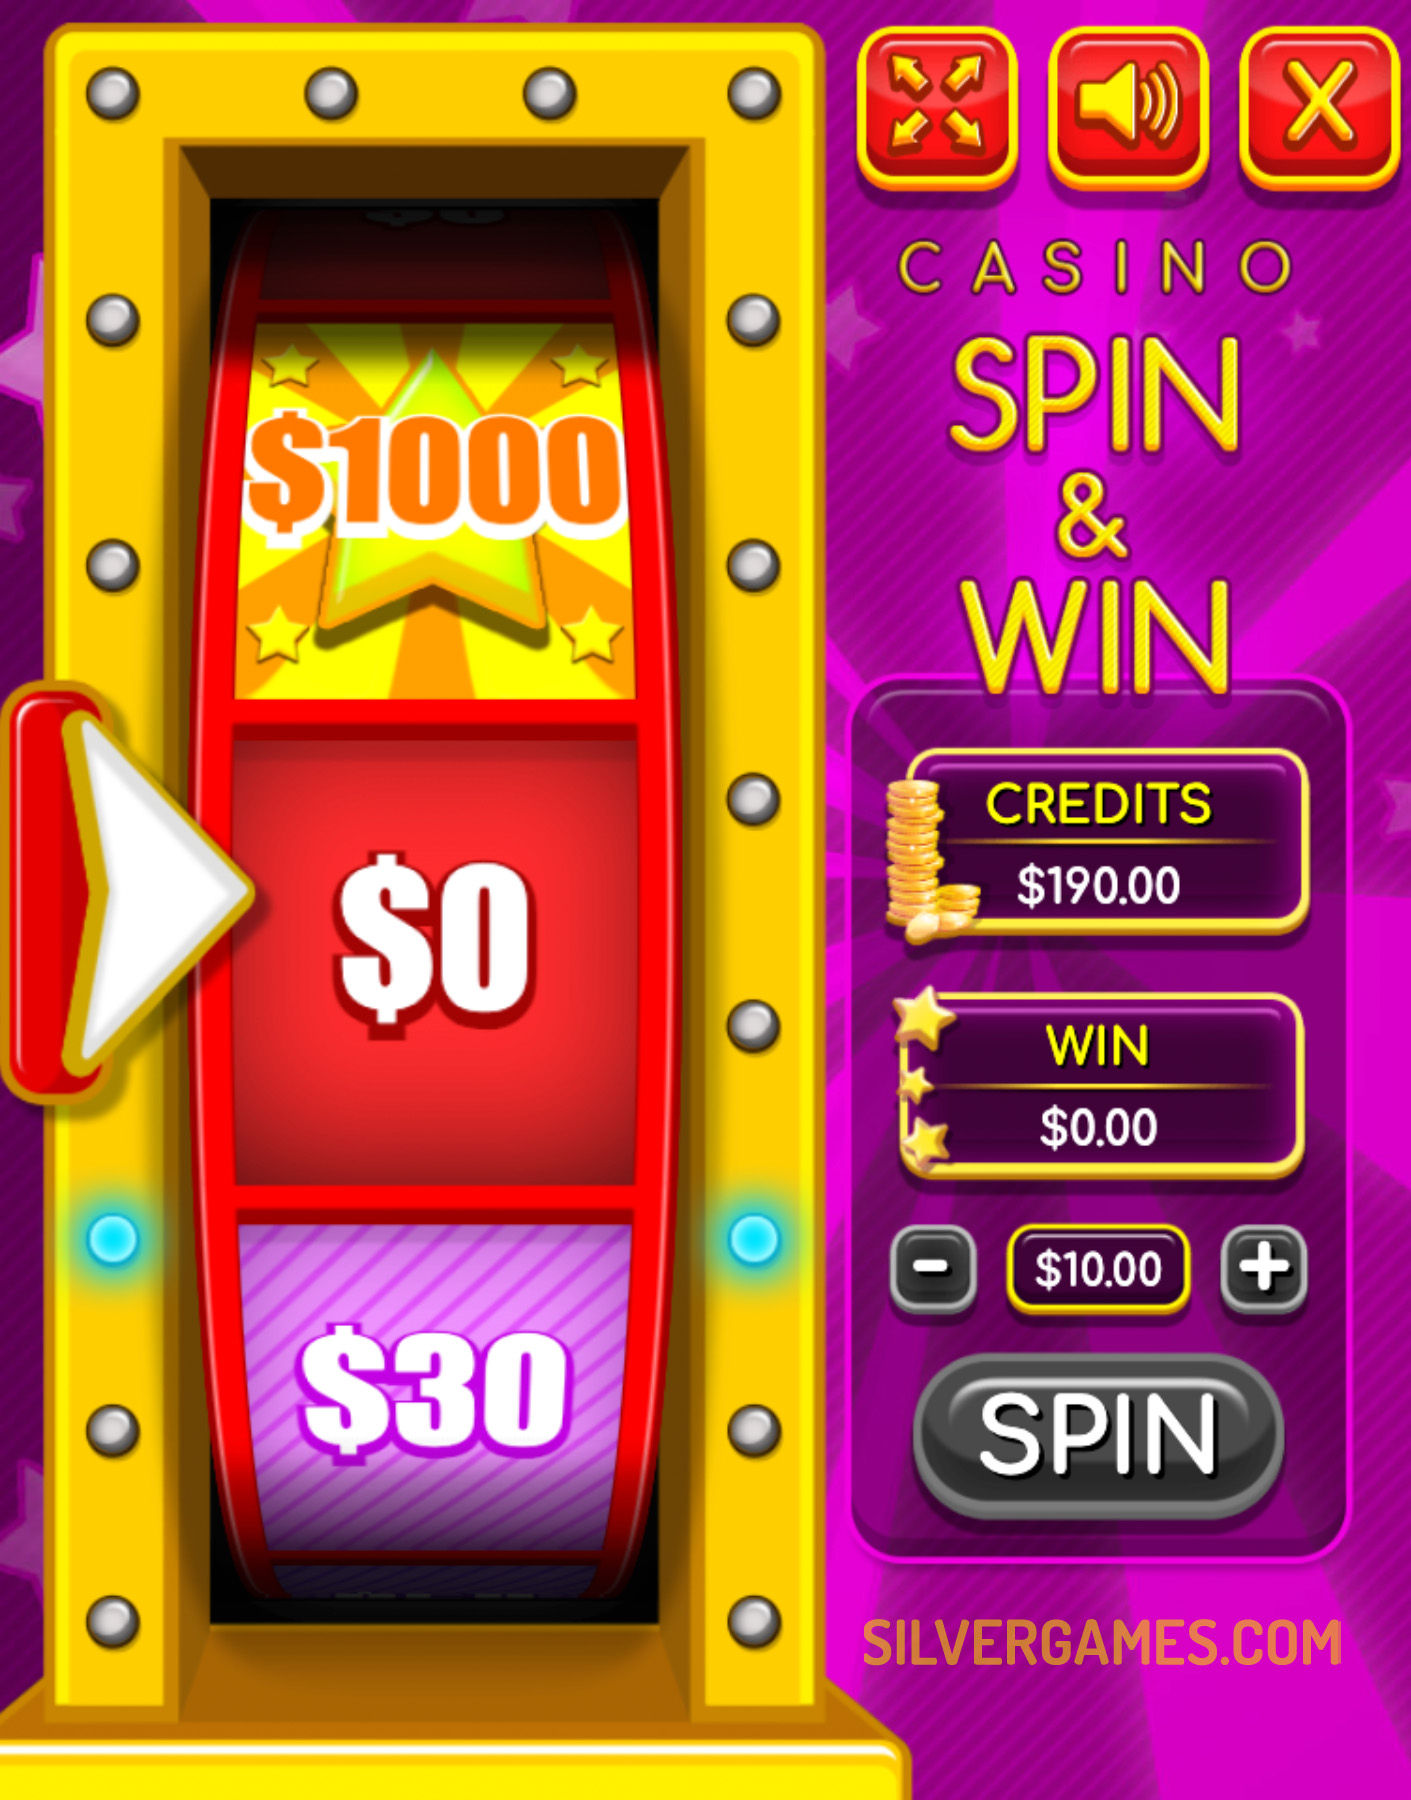 Spin & Win Online Casino Games